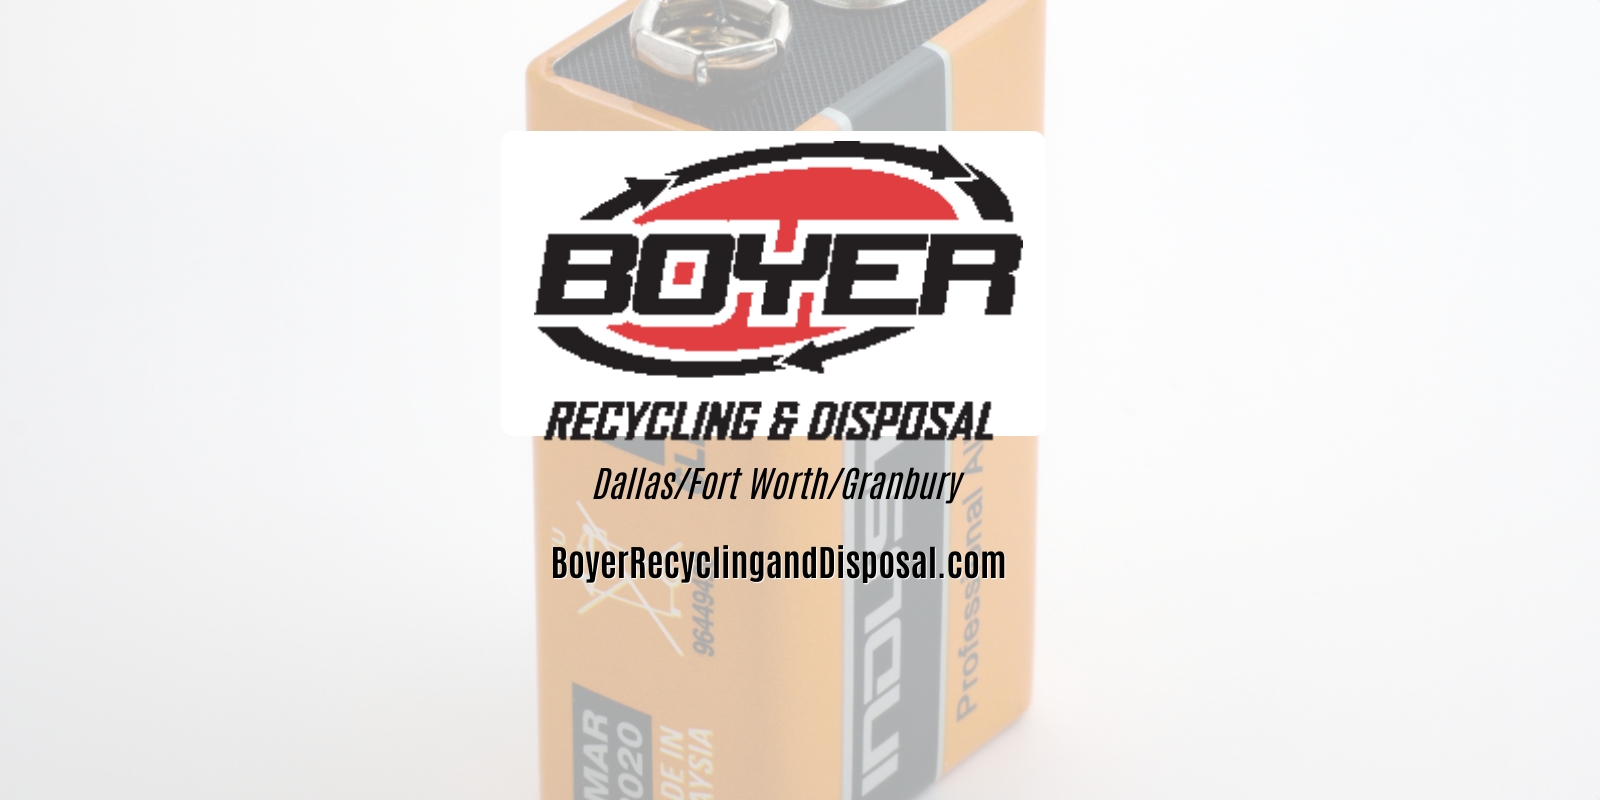 Help the Environment with Proper Battery Recycling